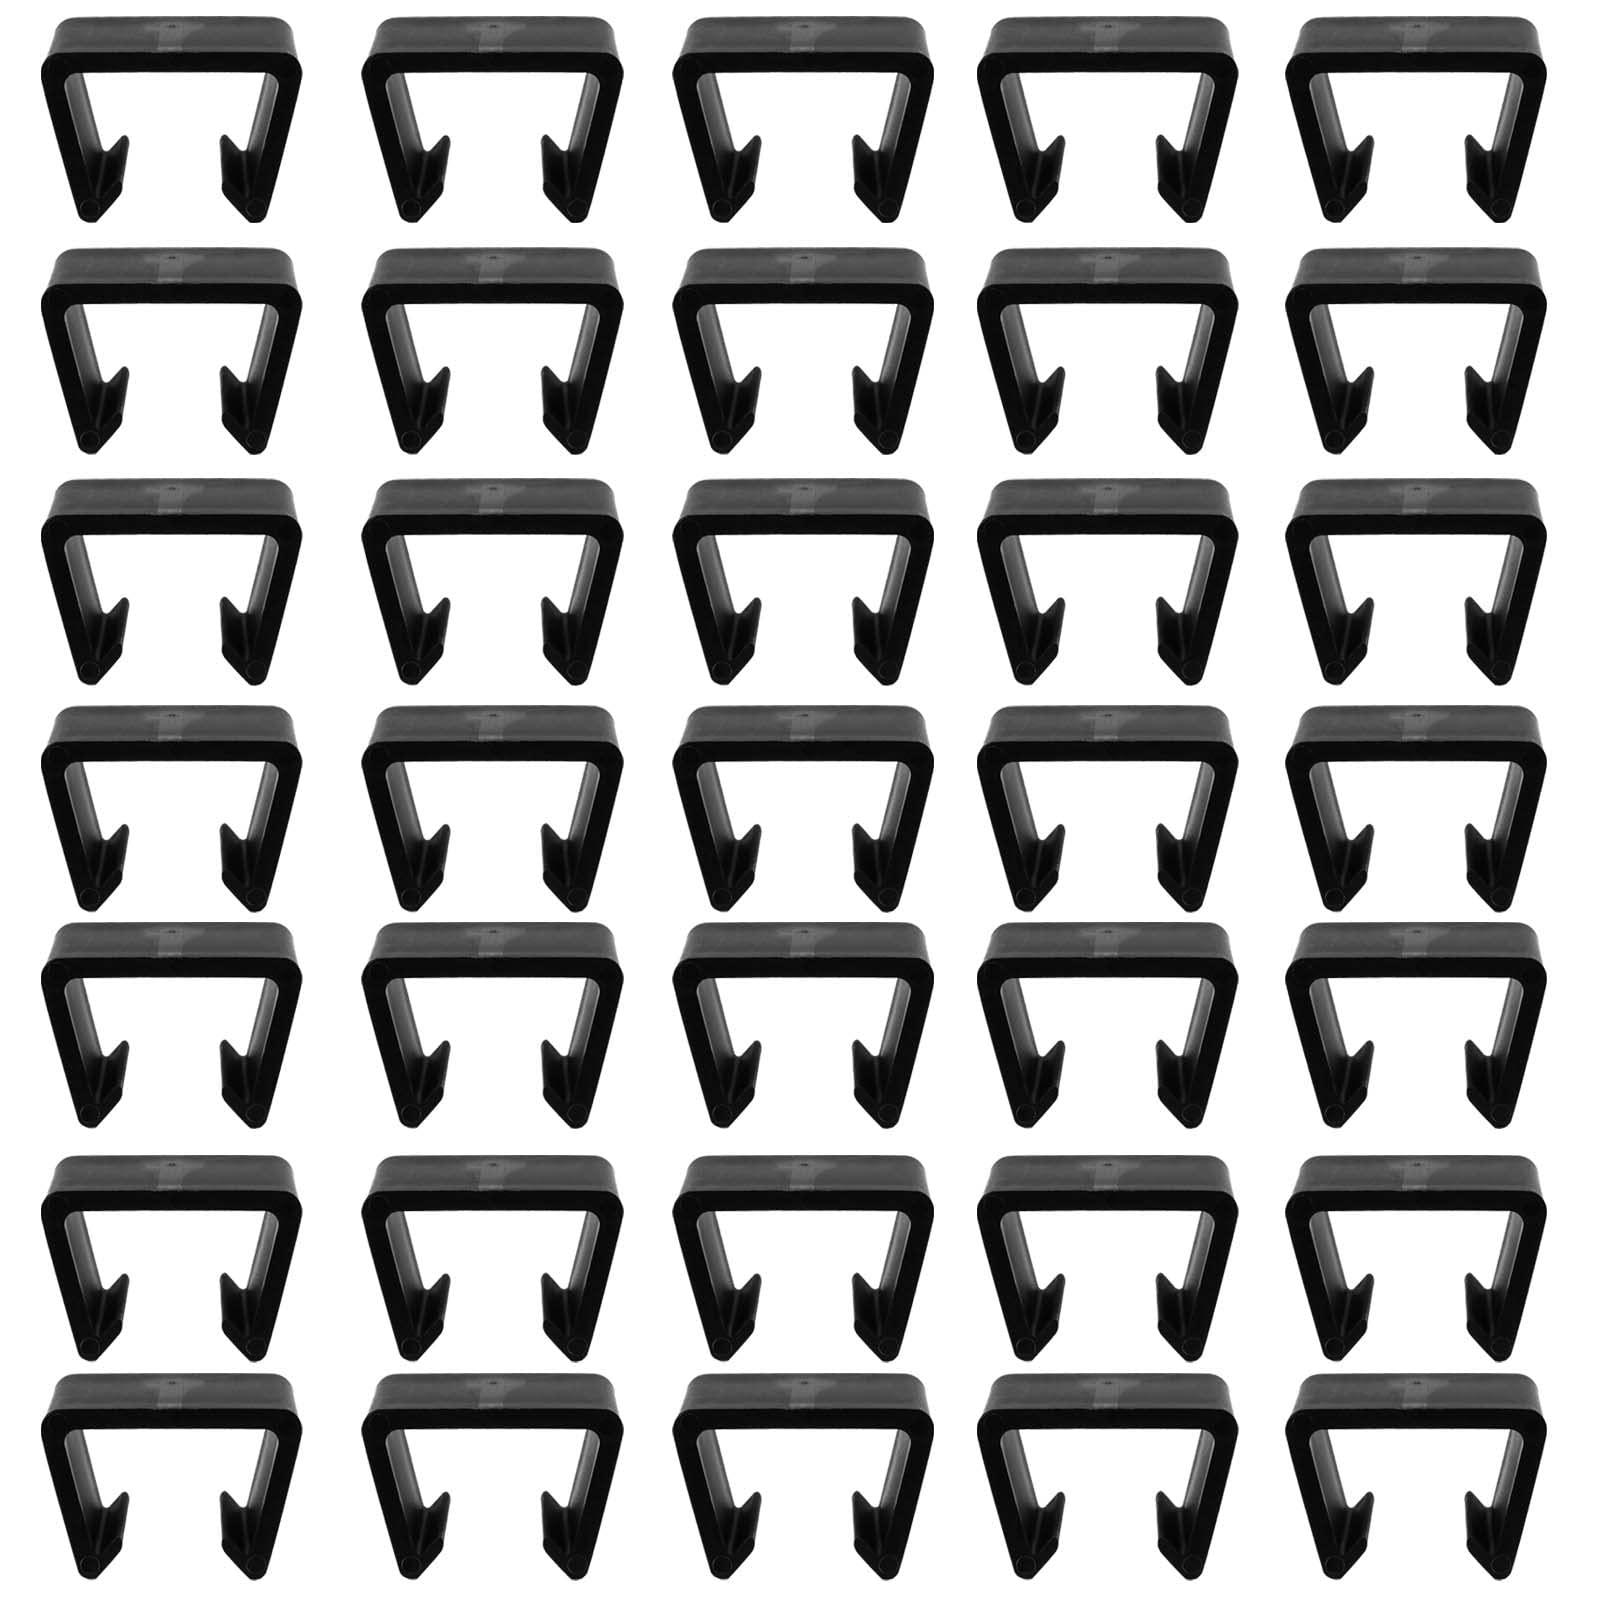 taicheut 30 pcs outdoor furniture clips, patio furniture fasteners outdoor furniture clips wicker for home, patio and outdoor